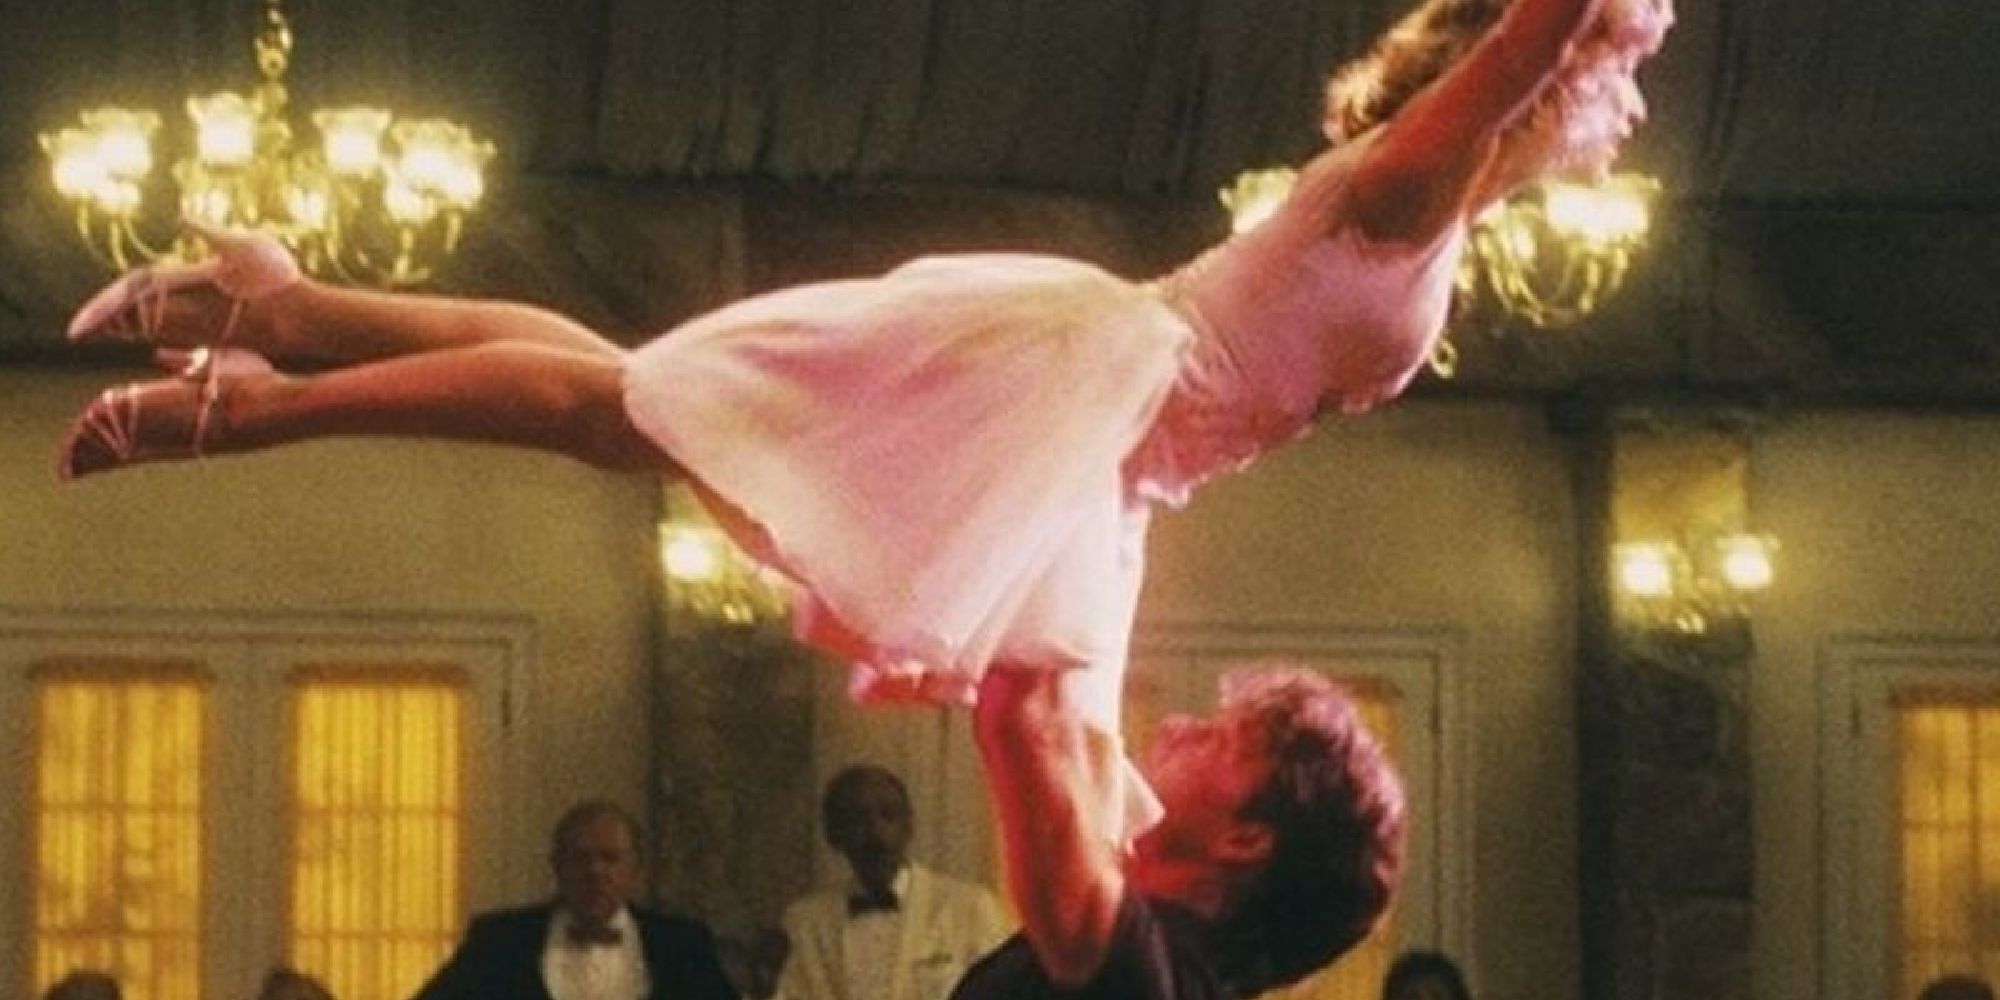 Patrick Swayze lifting Jennifer Grey in the iconic scene from Dirty Dancing